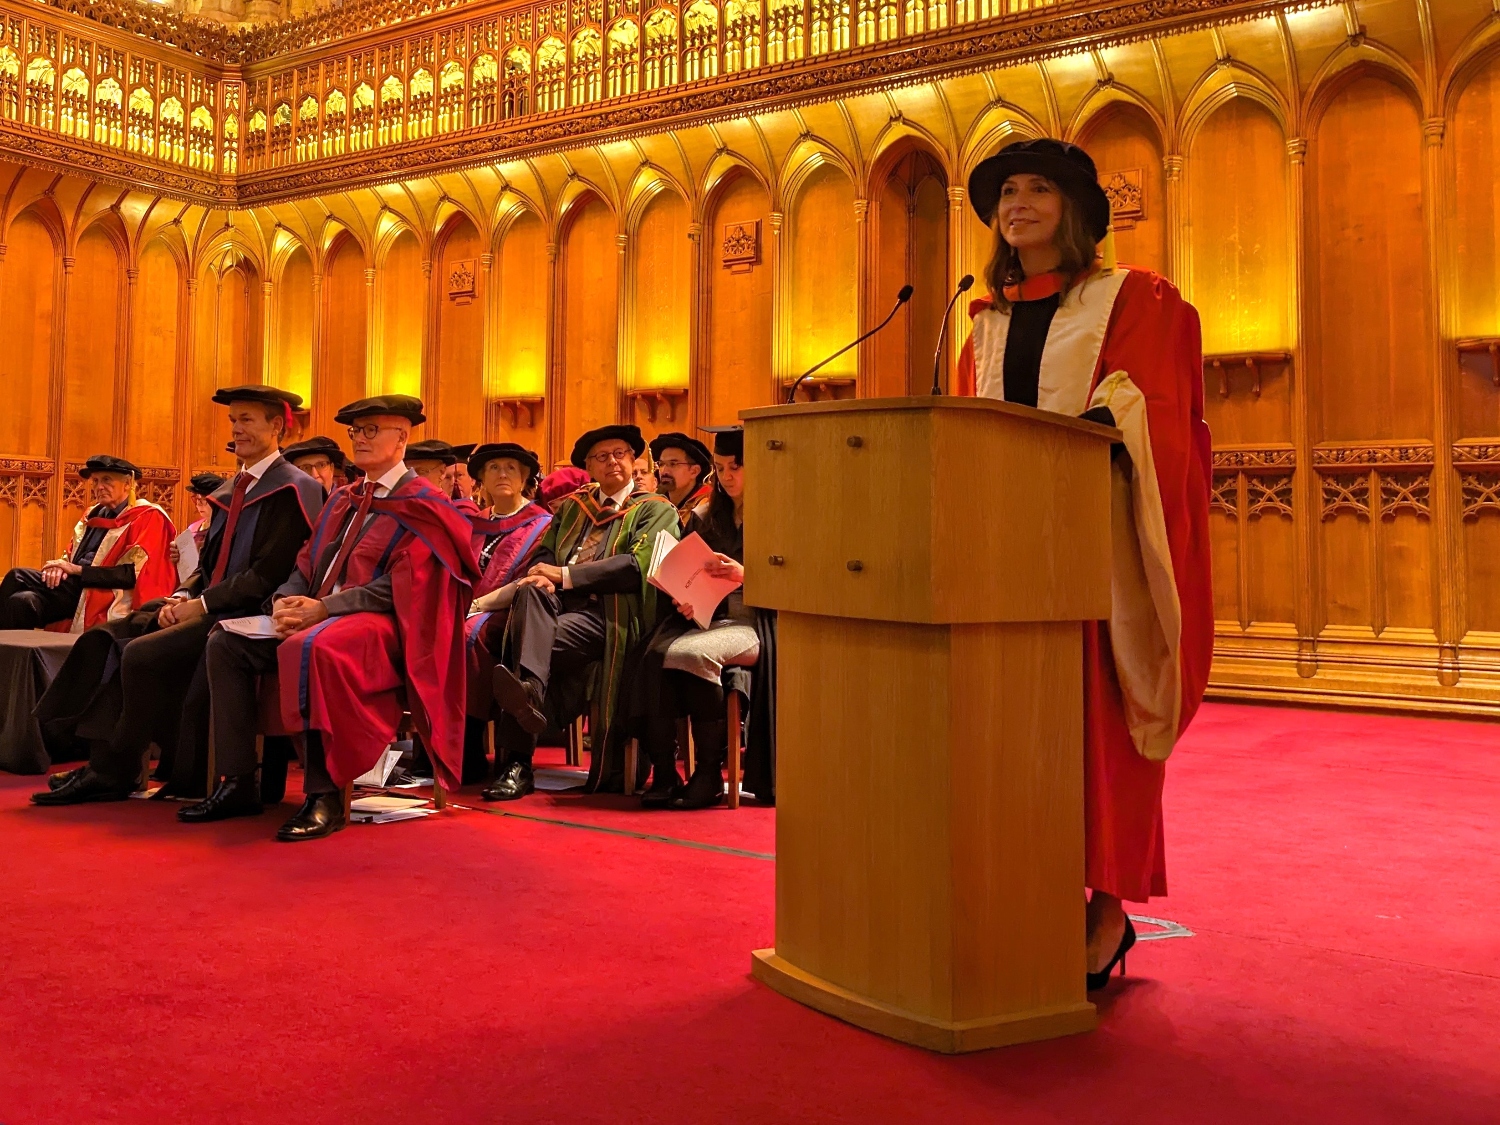 Lola Manterola speaking at the lectern after receiving an honorary doctorate